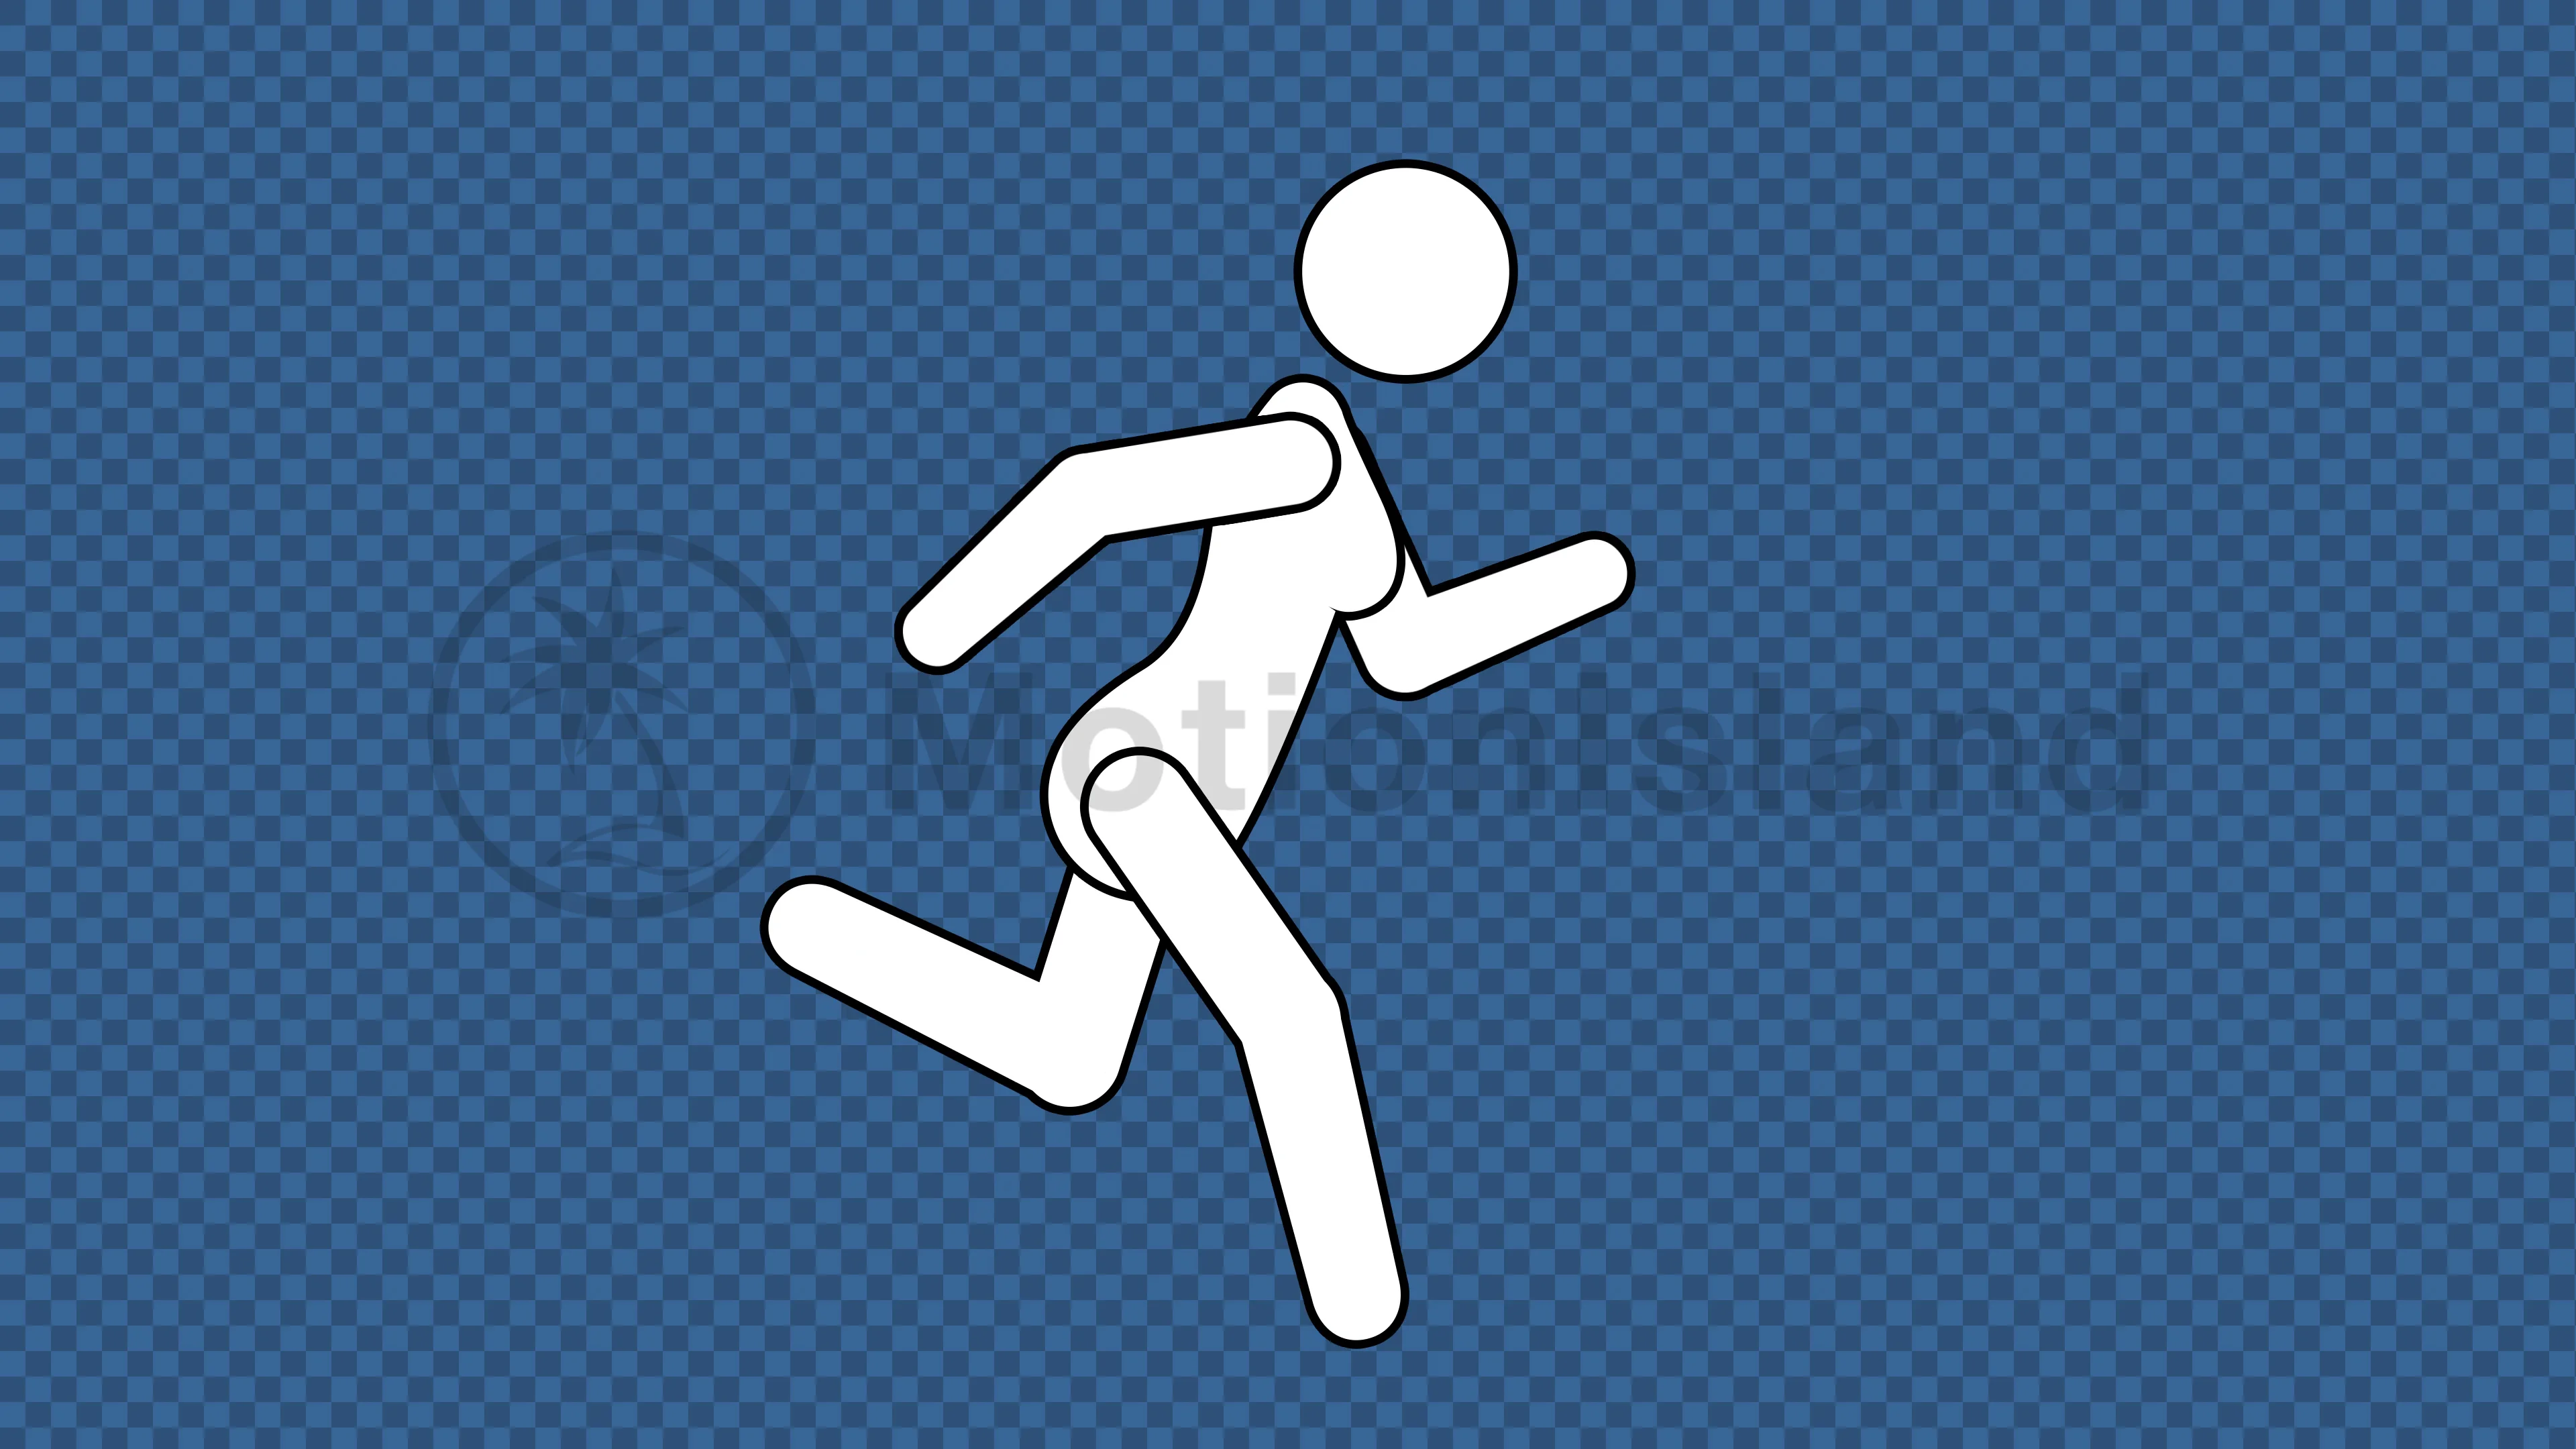 FranLOL deadly runners part, Stick Figure Animations